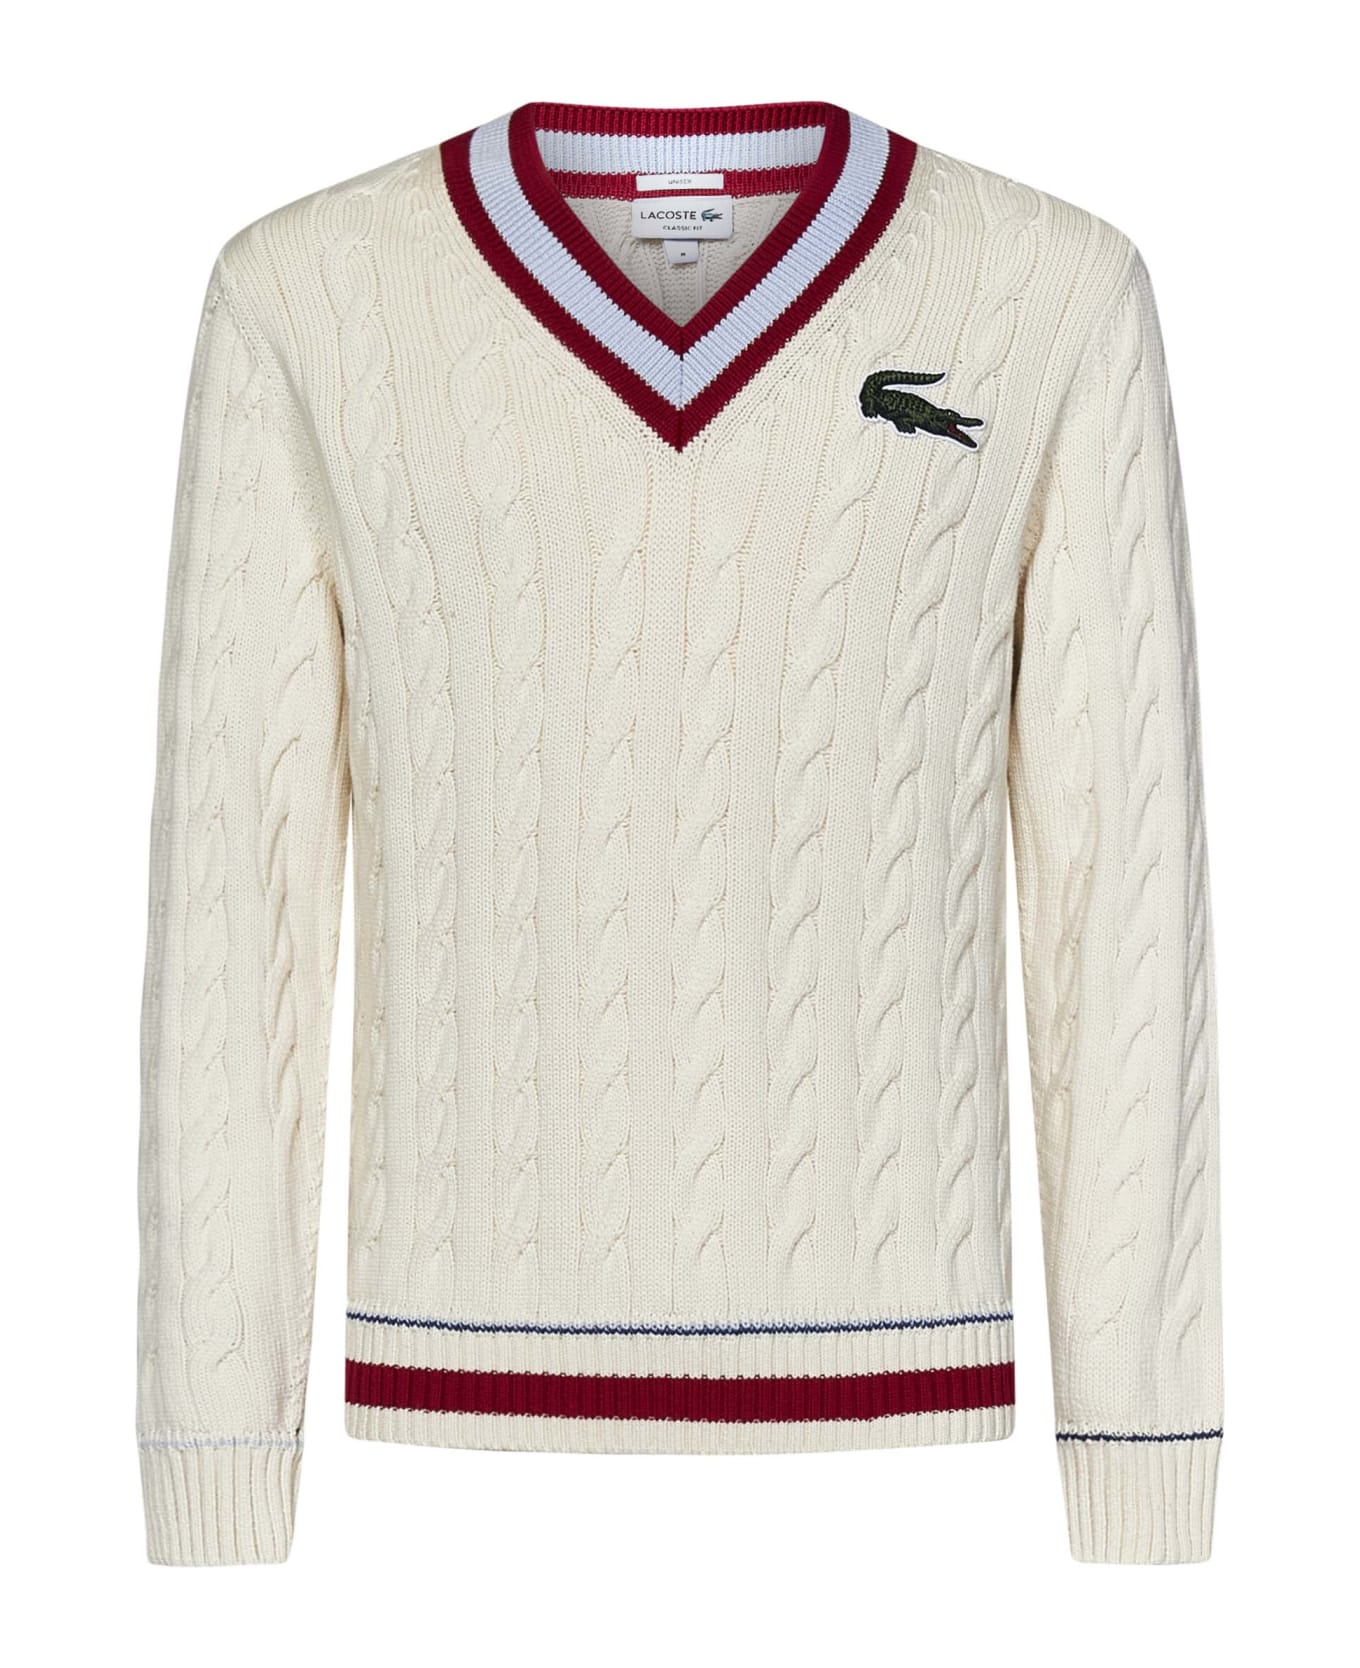 Lacoste Sweater - White name:475